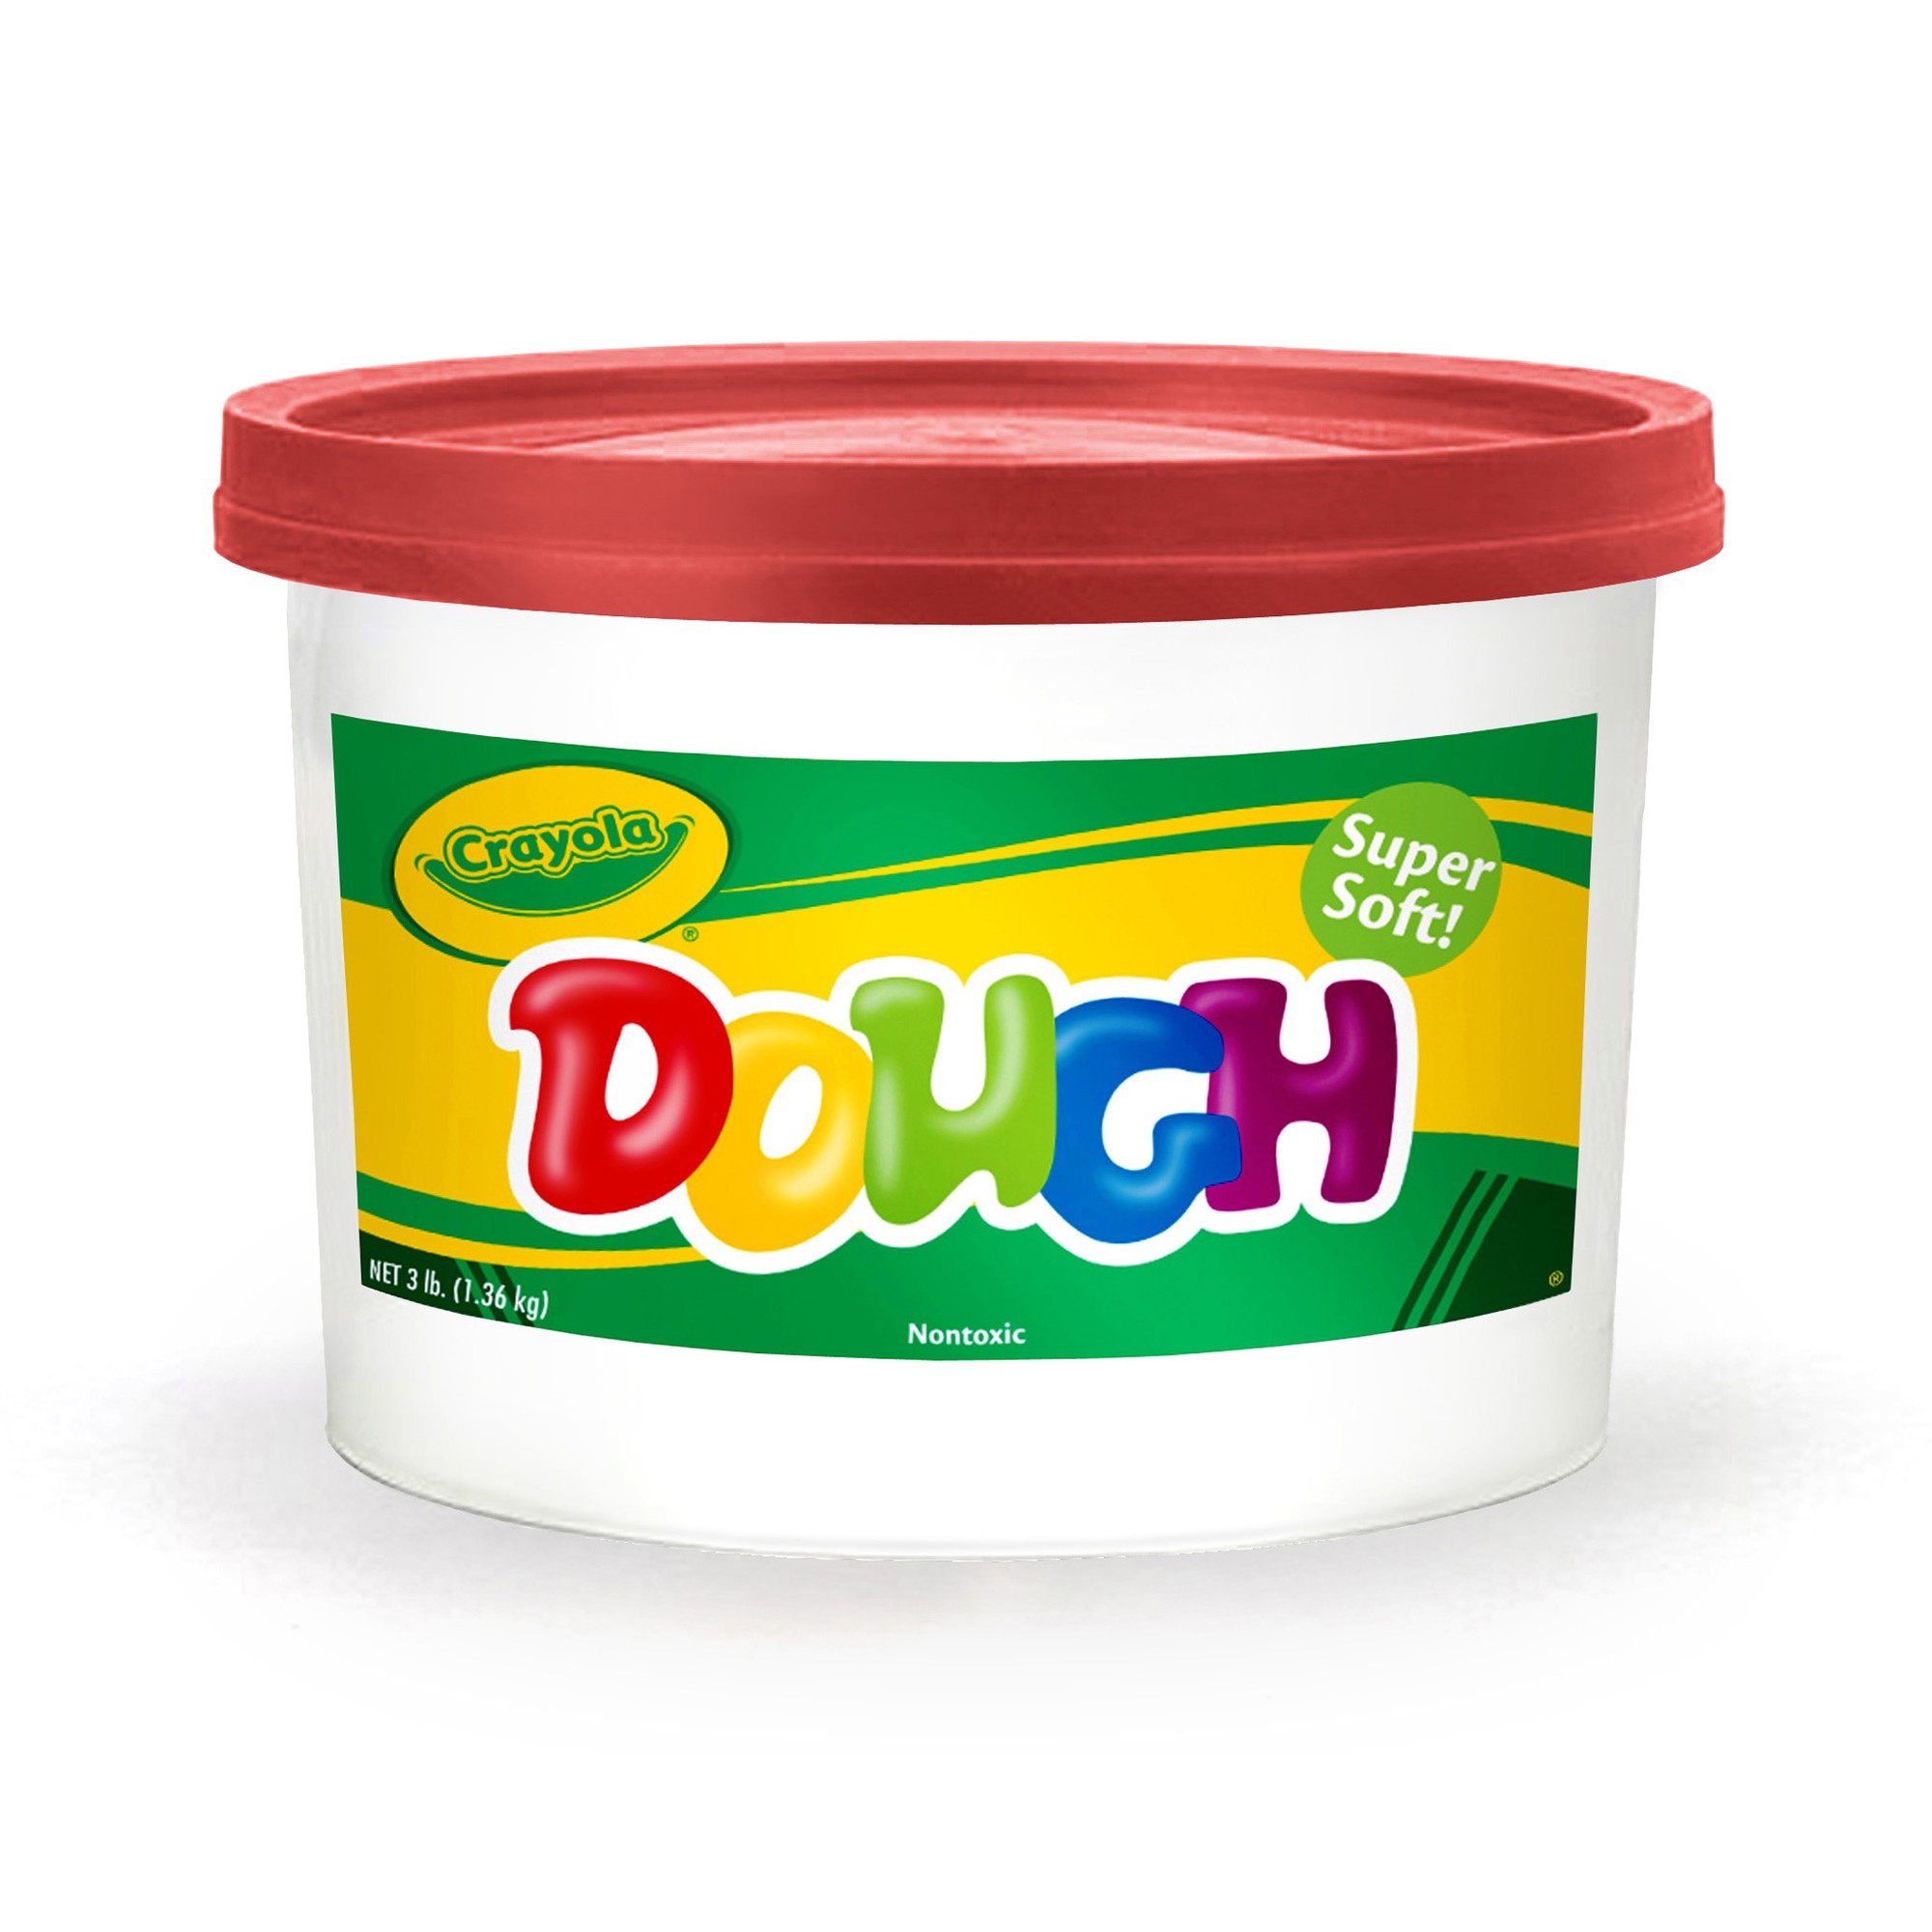 Super Soft Modeling Dough, Red, 3 lbs